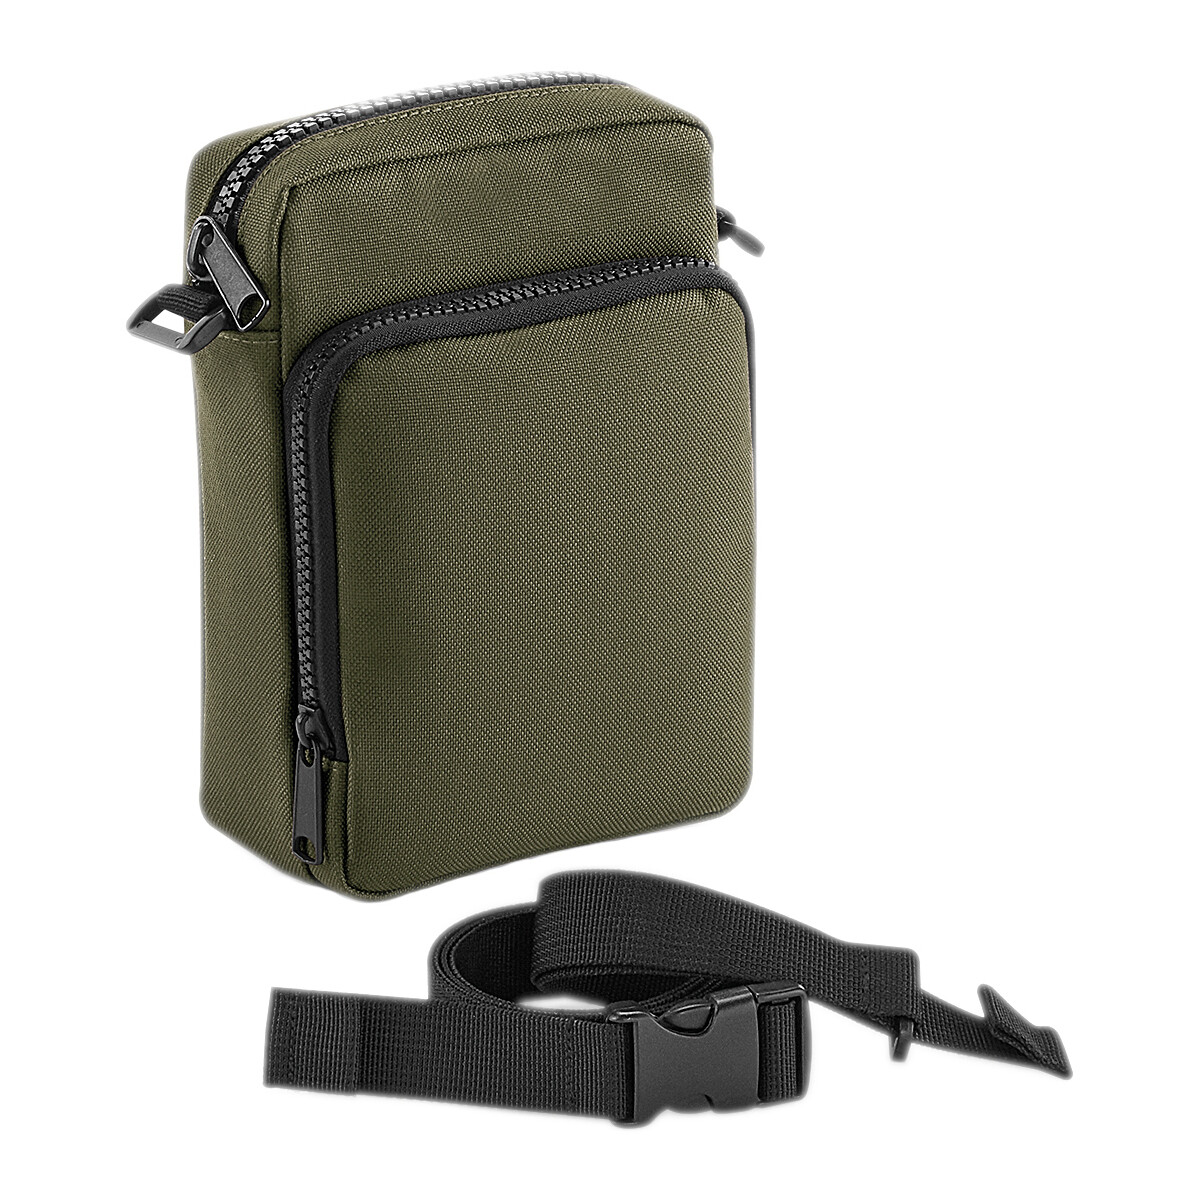 Borse Tracolle Bagbase Modulr Verde